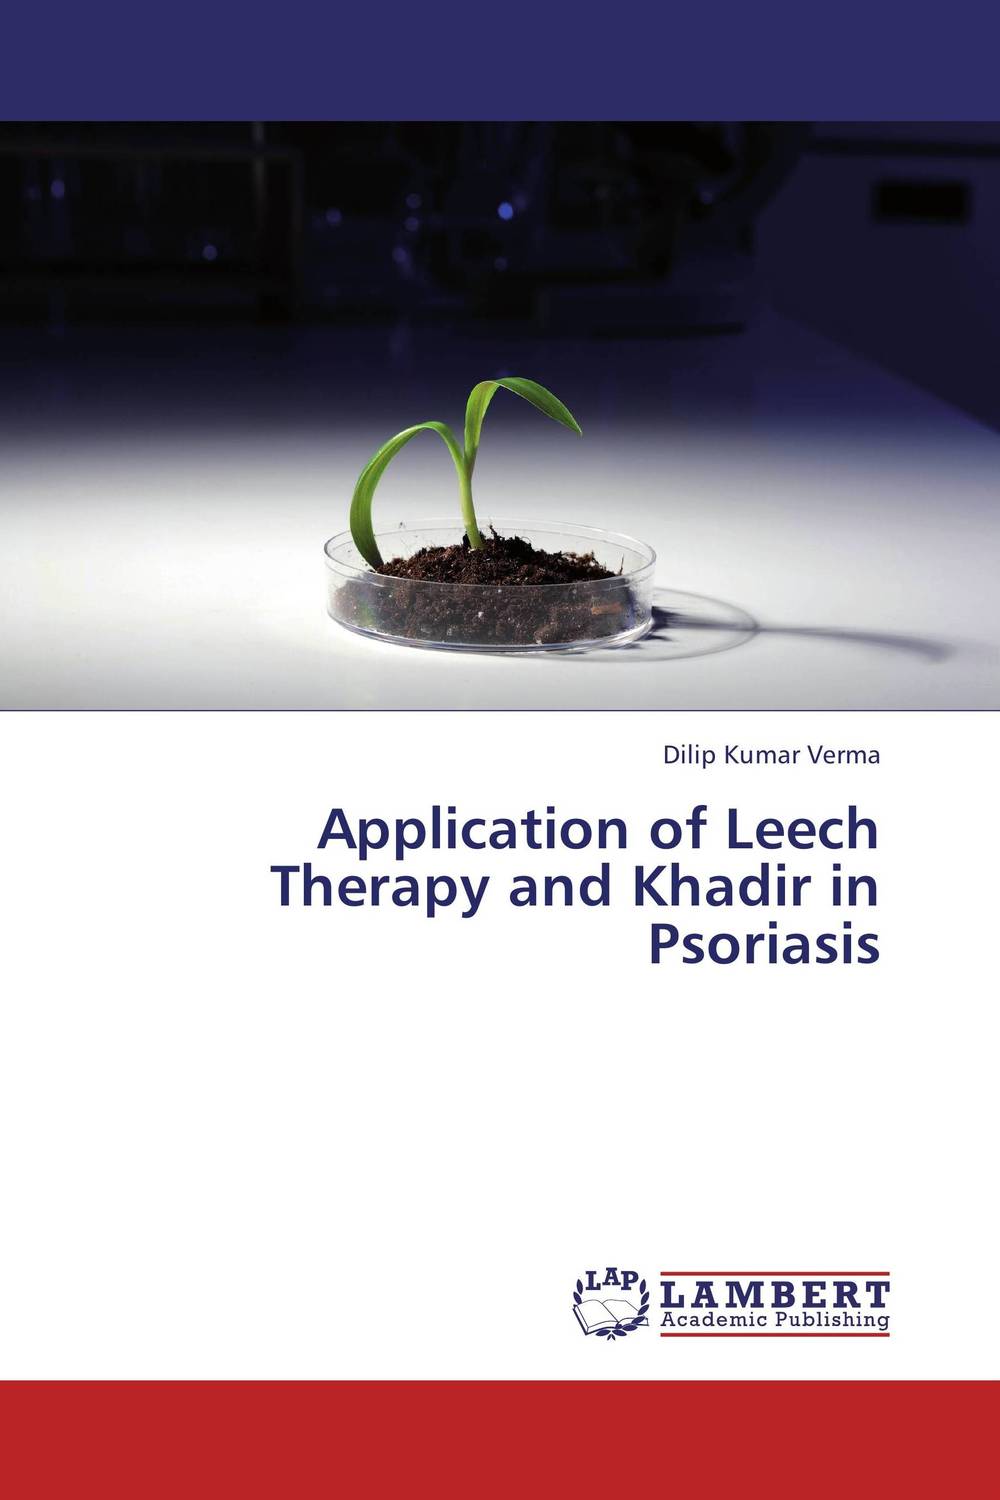 Application of Leech Therapy and Khadir in Psoriasis